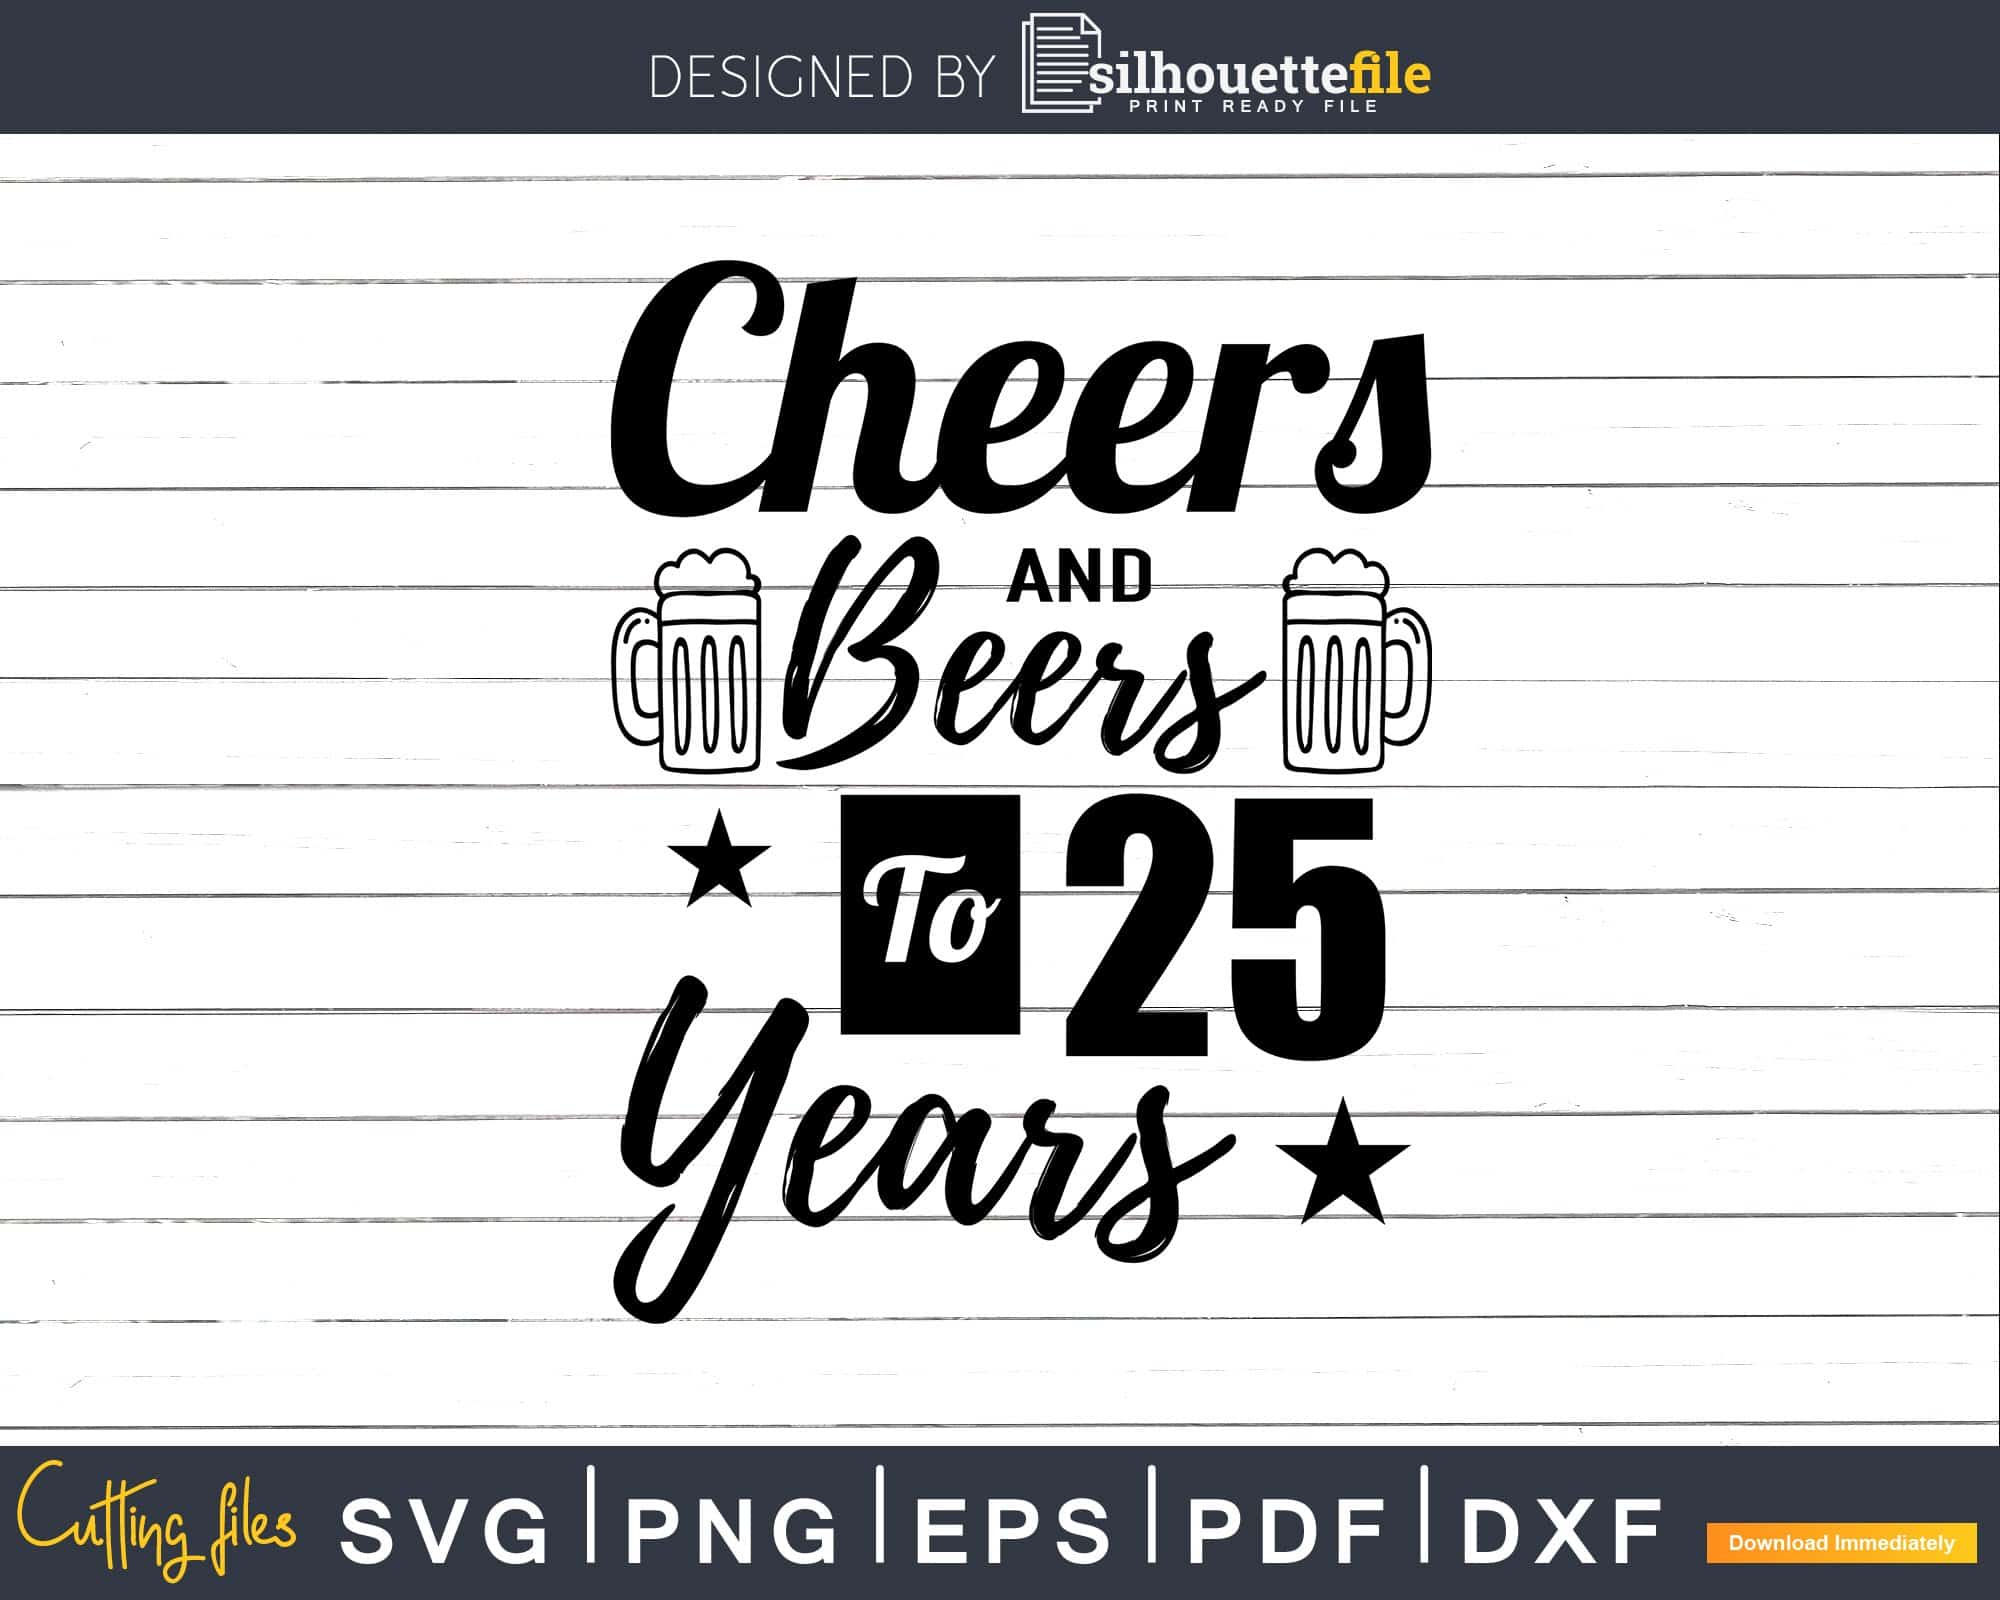 Download Cheers And Beers To 25th Birthday Years Svg Design Cricut Silhouettefile